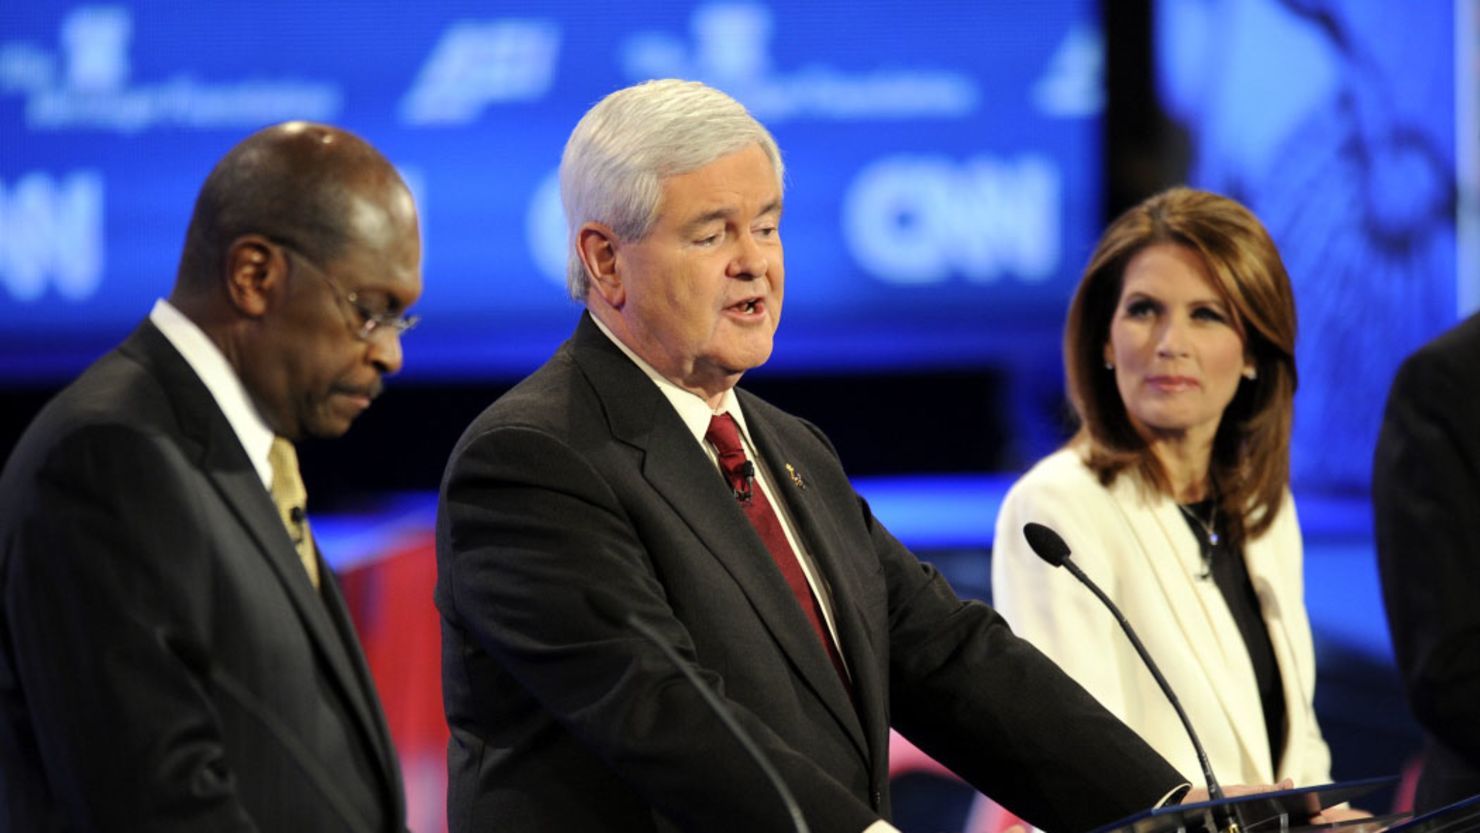 Newt Gingrich drew the most buzz among the candidates in CNN's GOP debate Tuesday night, says David Gergen.